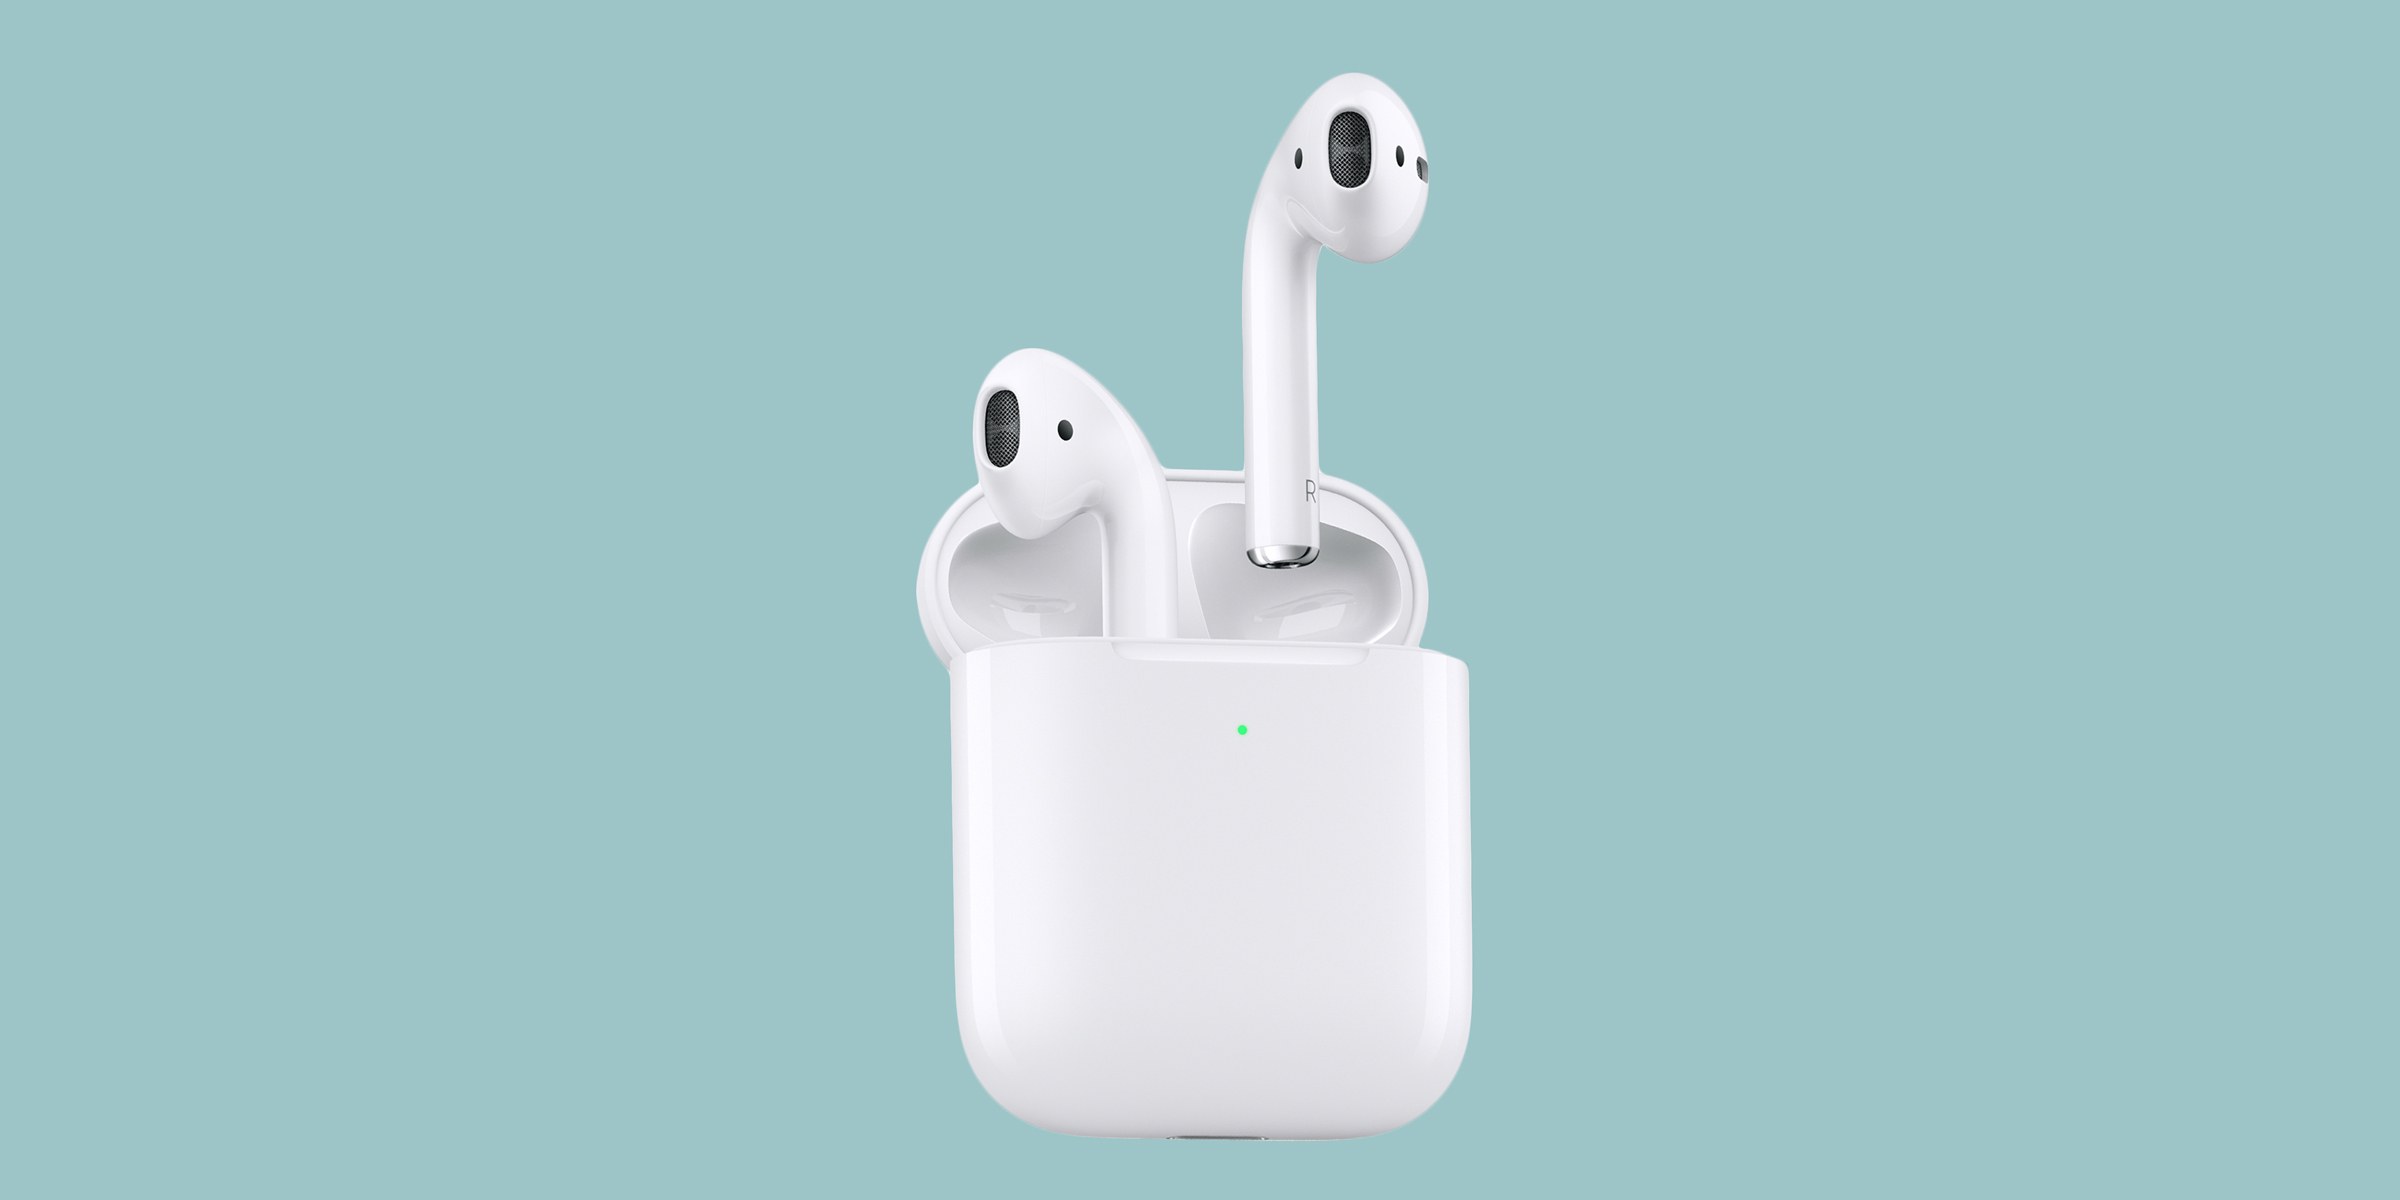 airpods or airpods pro